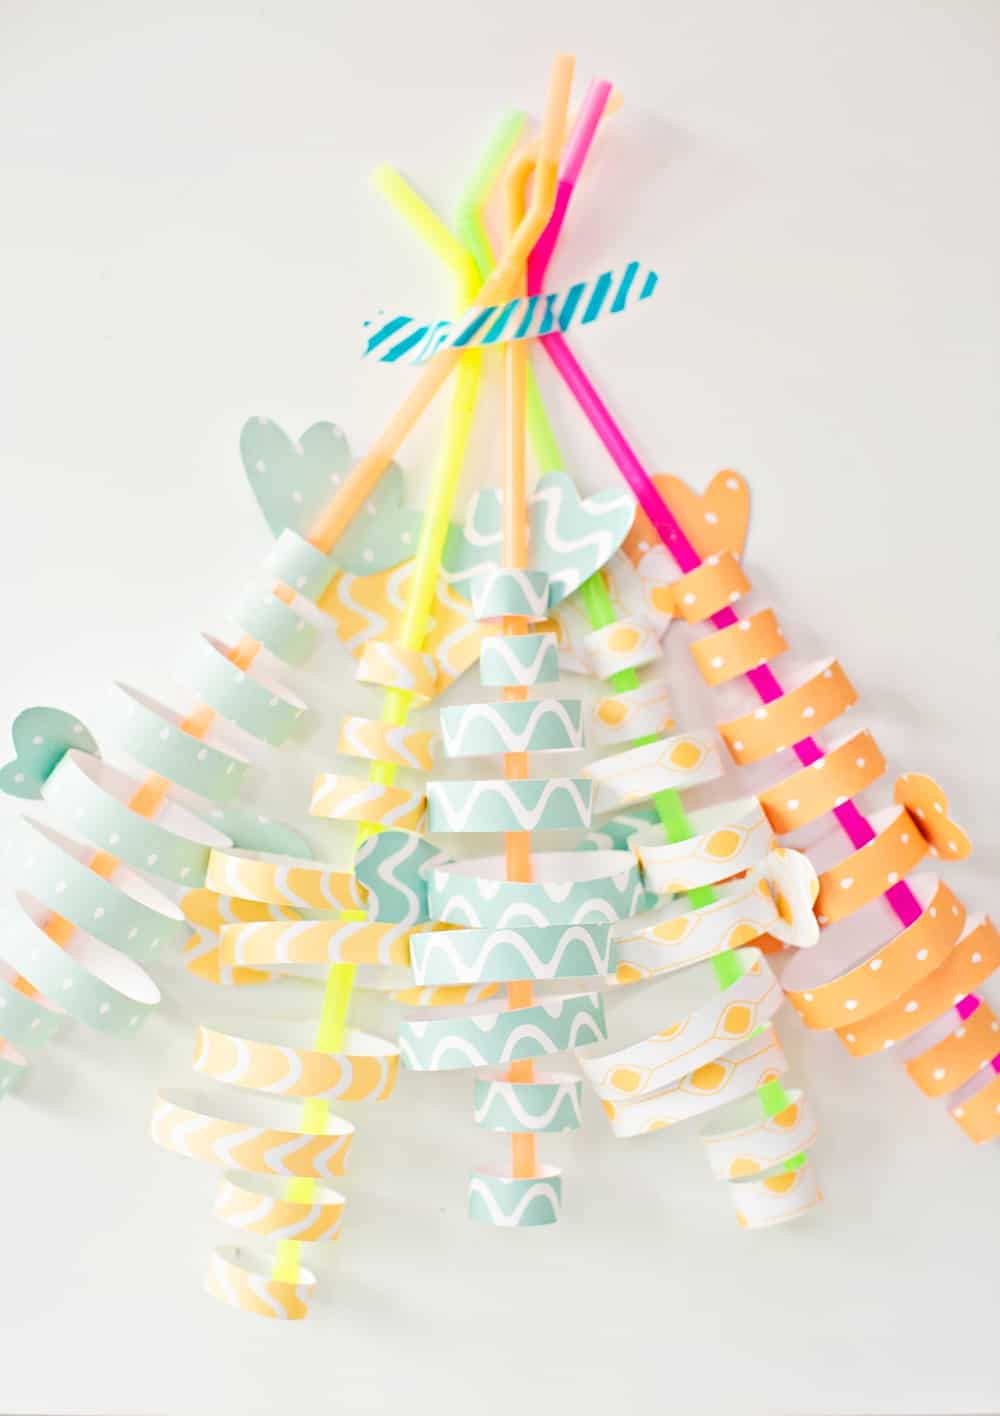 paper fish craft made from colorful strips of paper and straws 